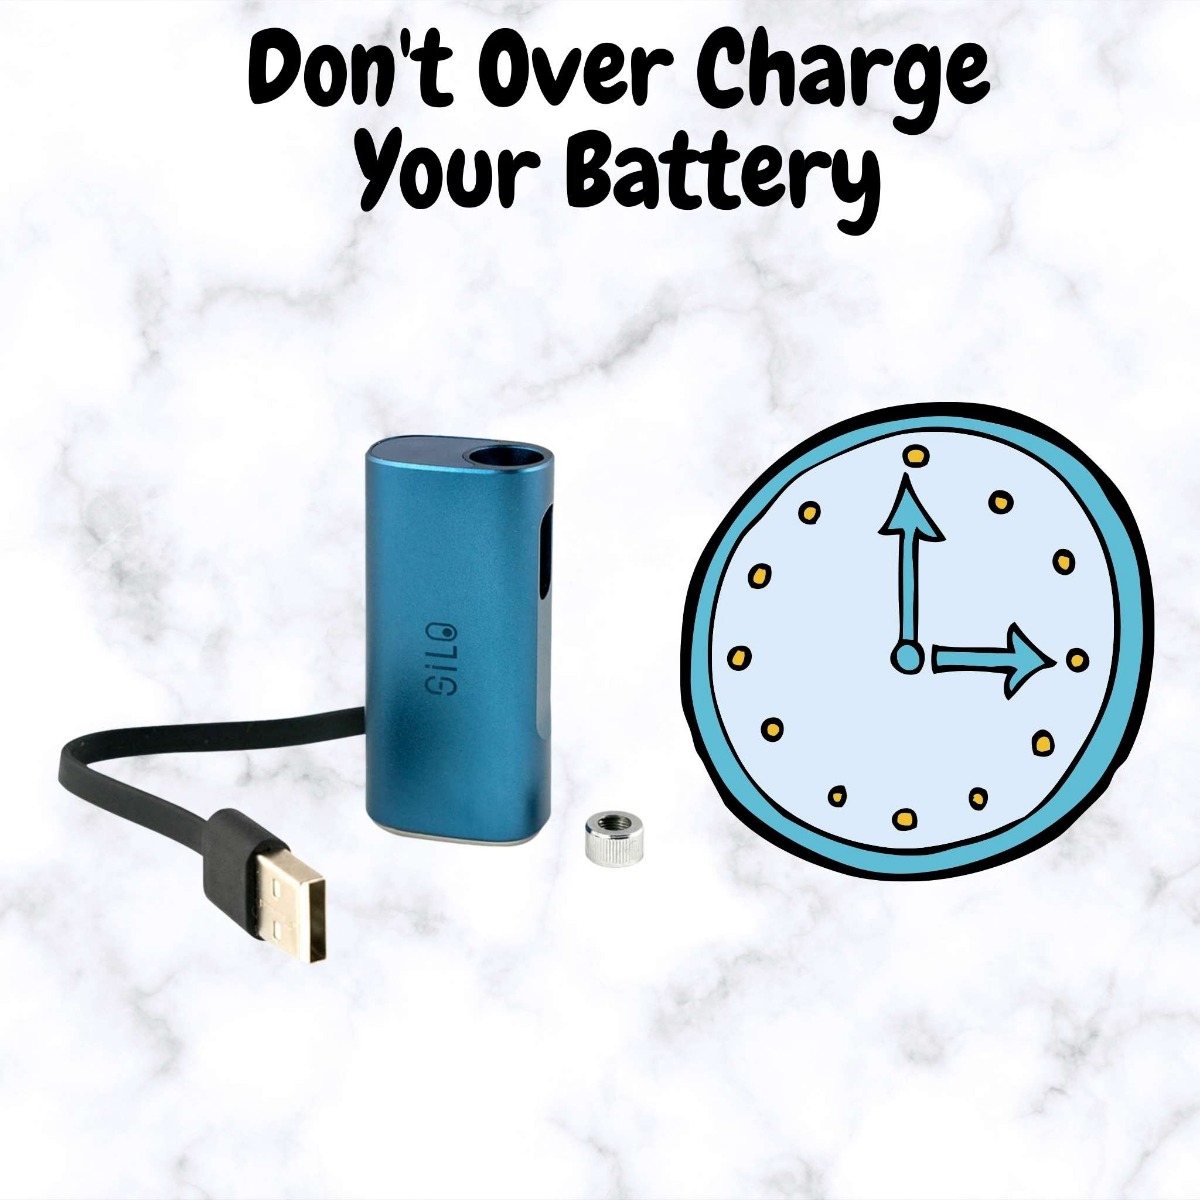 vape battery with charge and clock next to it with text saying Don't Over Charge Your Battery